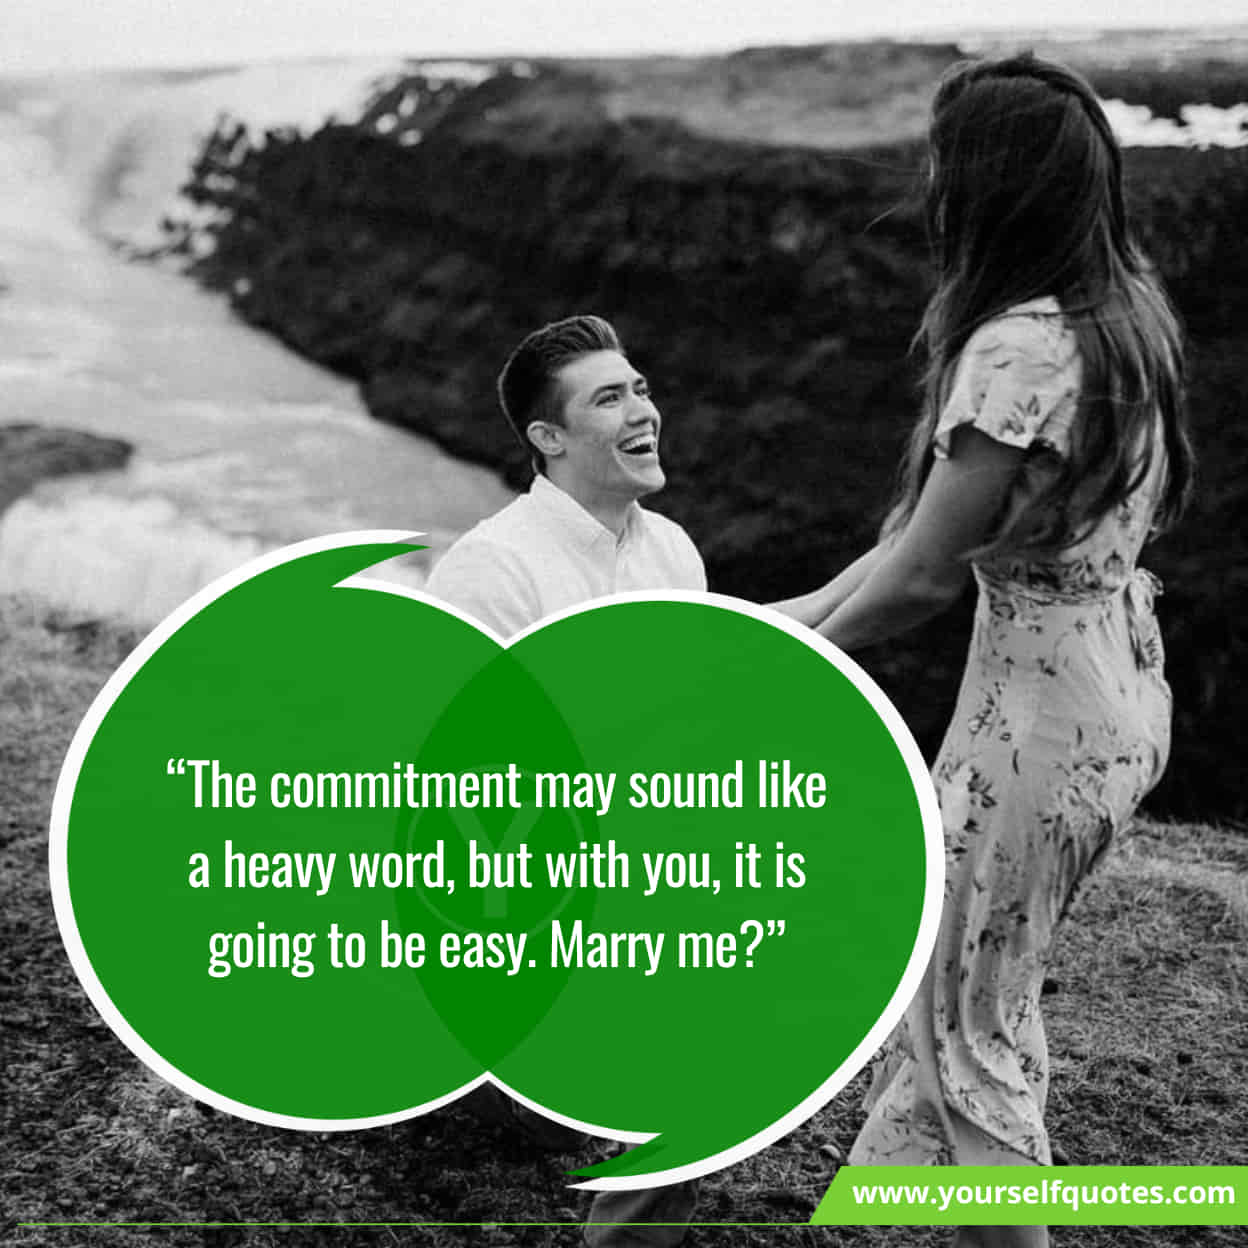 Exciting Messages For Marriage Proposal